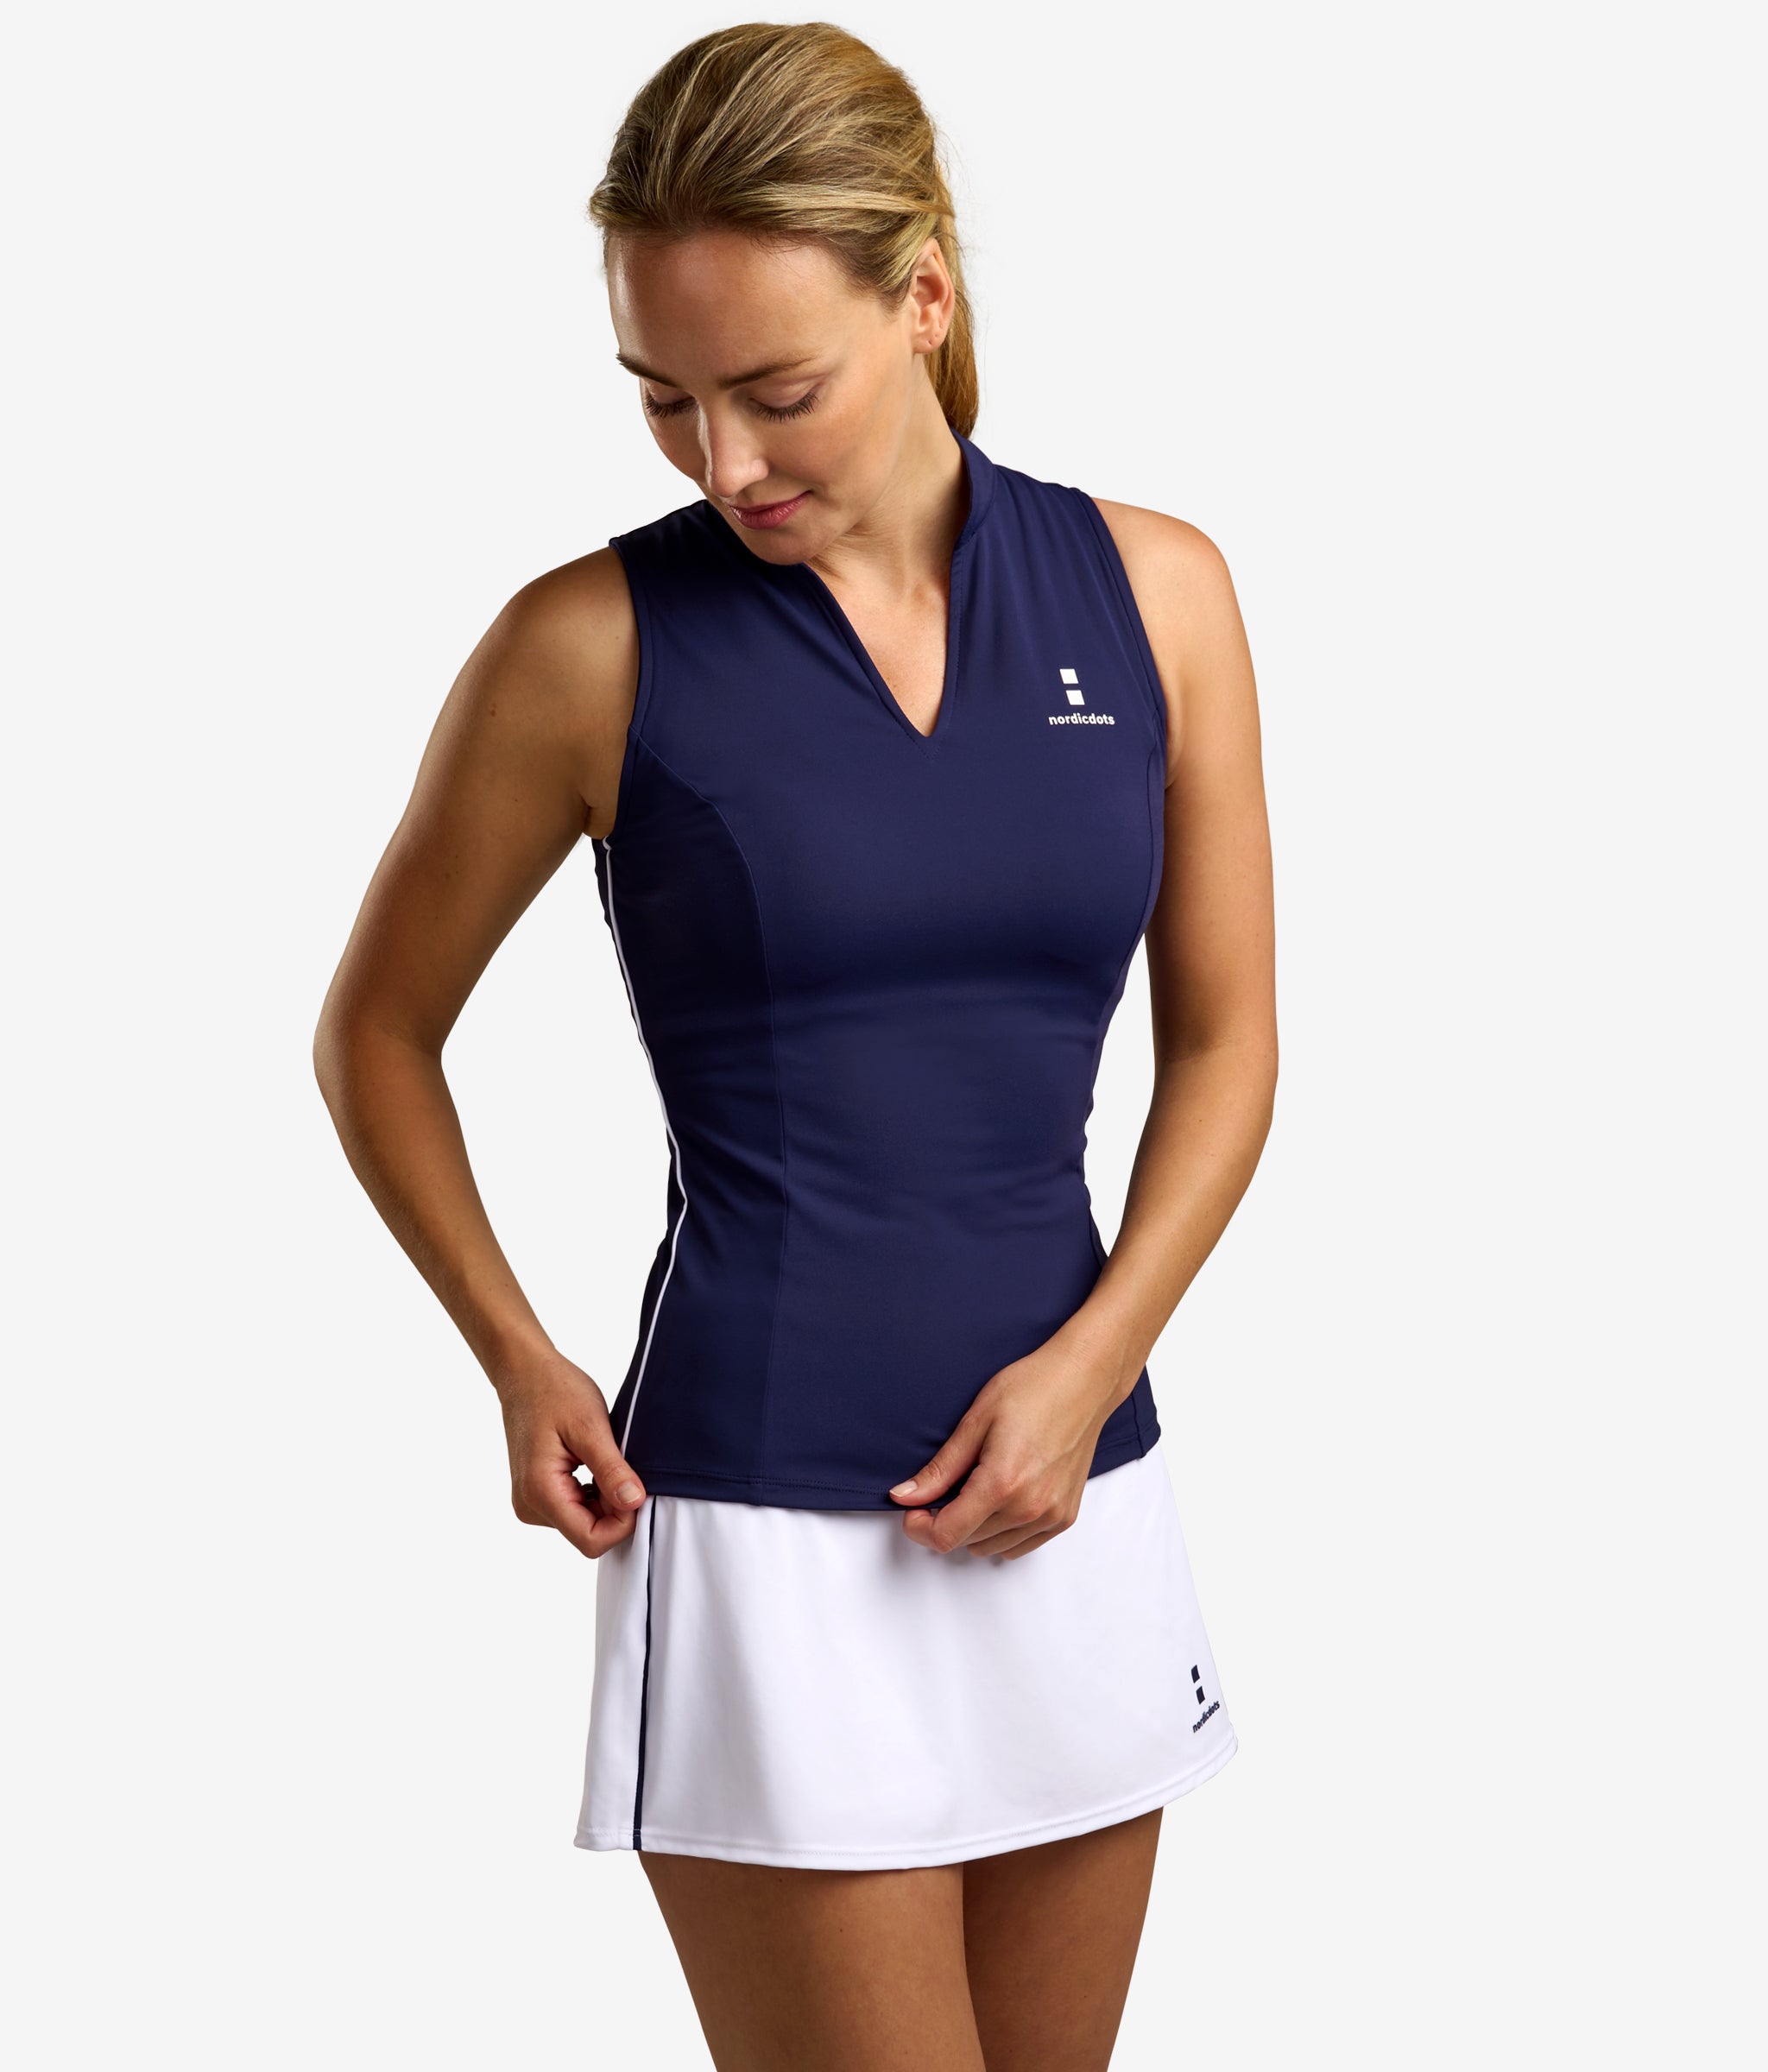 nordicdots women tennis padel golf beautiful sustainable outfit in navy blue skirt in white nordicdots.com